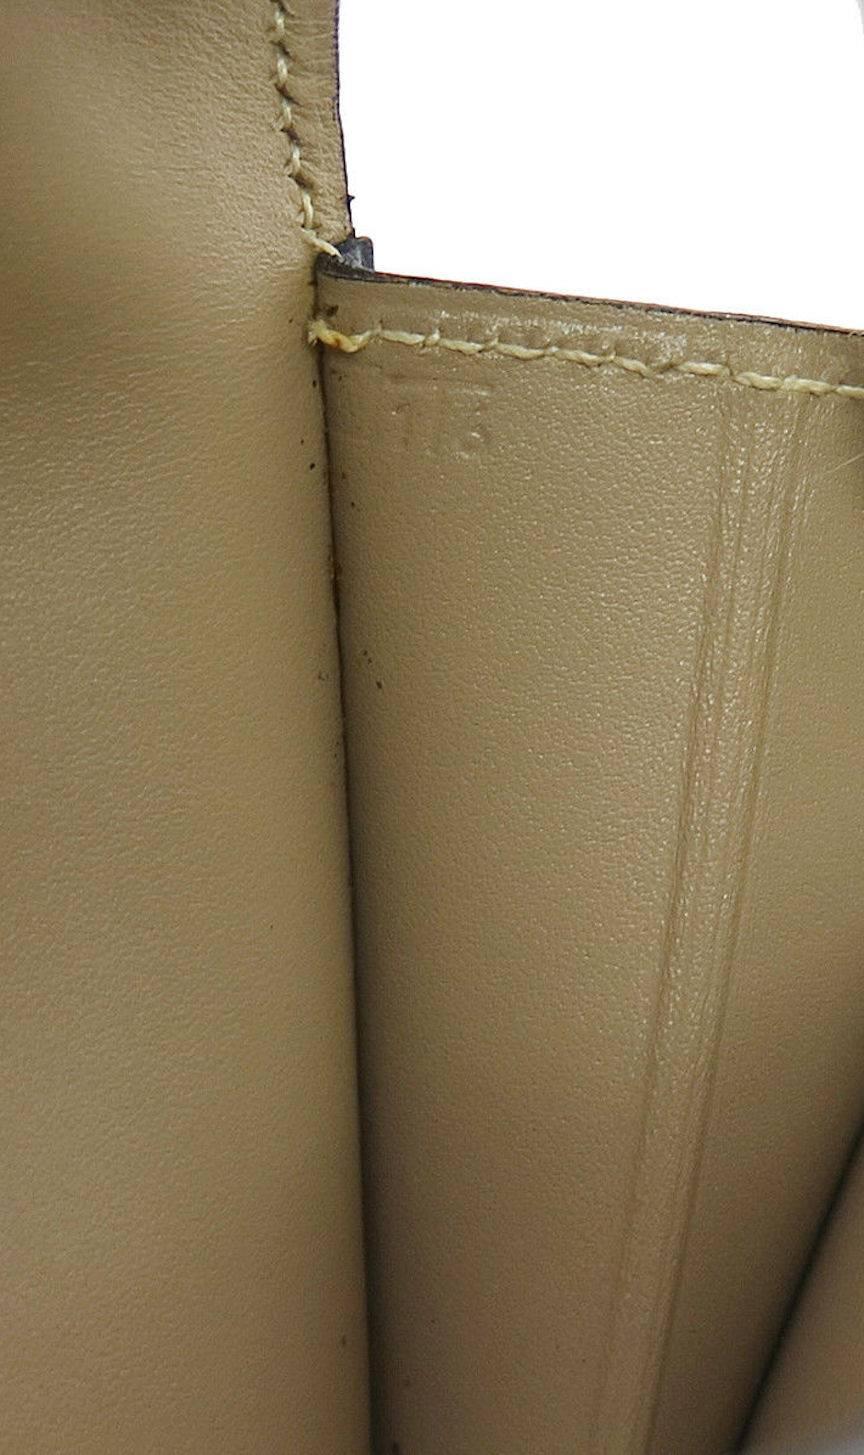 Brown Hermes Rare Taupe Leather Envelope Evening Flap Clutch Bag in Dust Bag